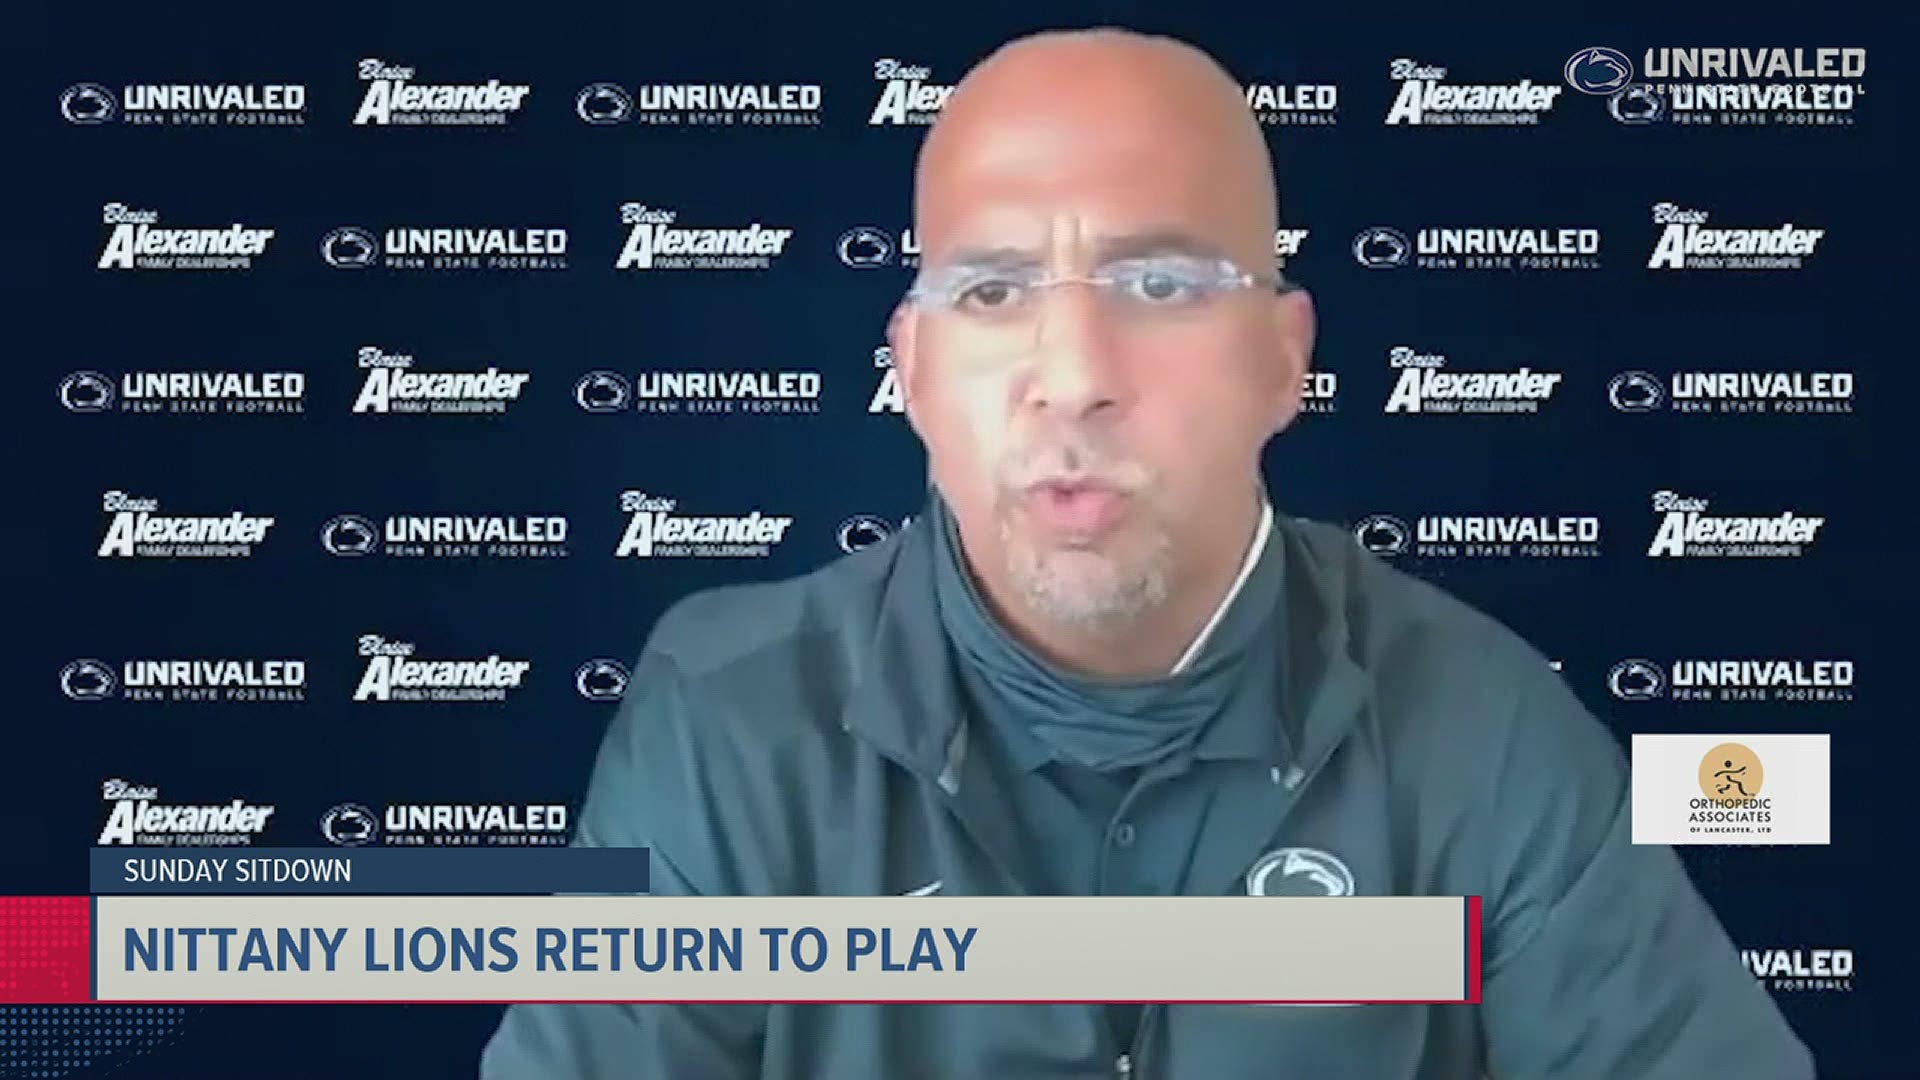 Penn State Head Football Coach James Franklin answers questions about the Big Ten returning to play this Fall